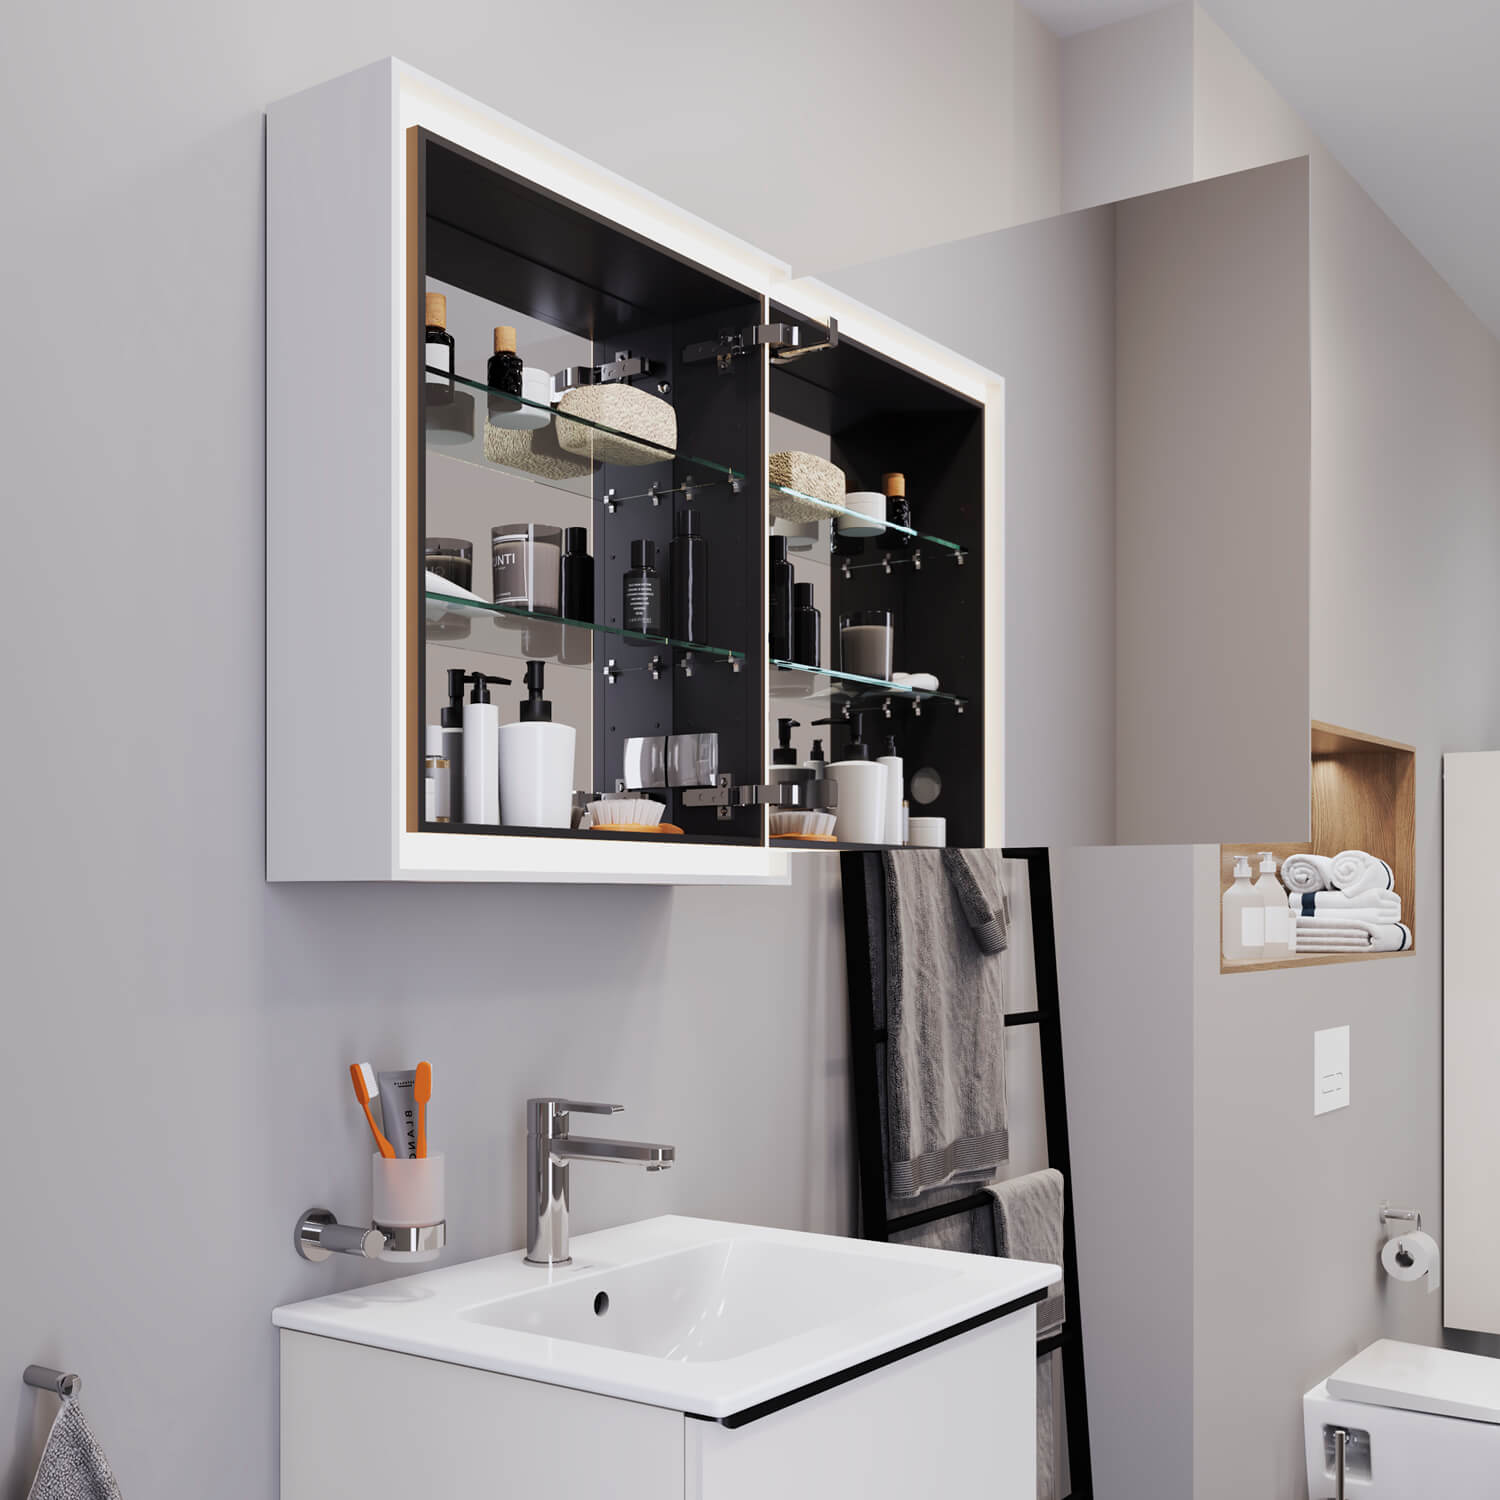 L-Cube mirror cabinet with many functions and additional storage space
